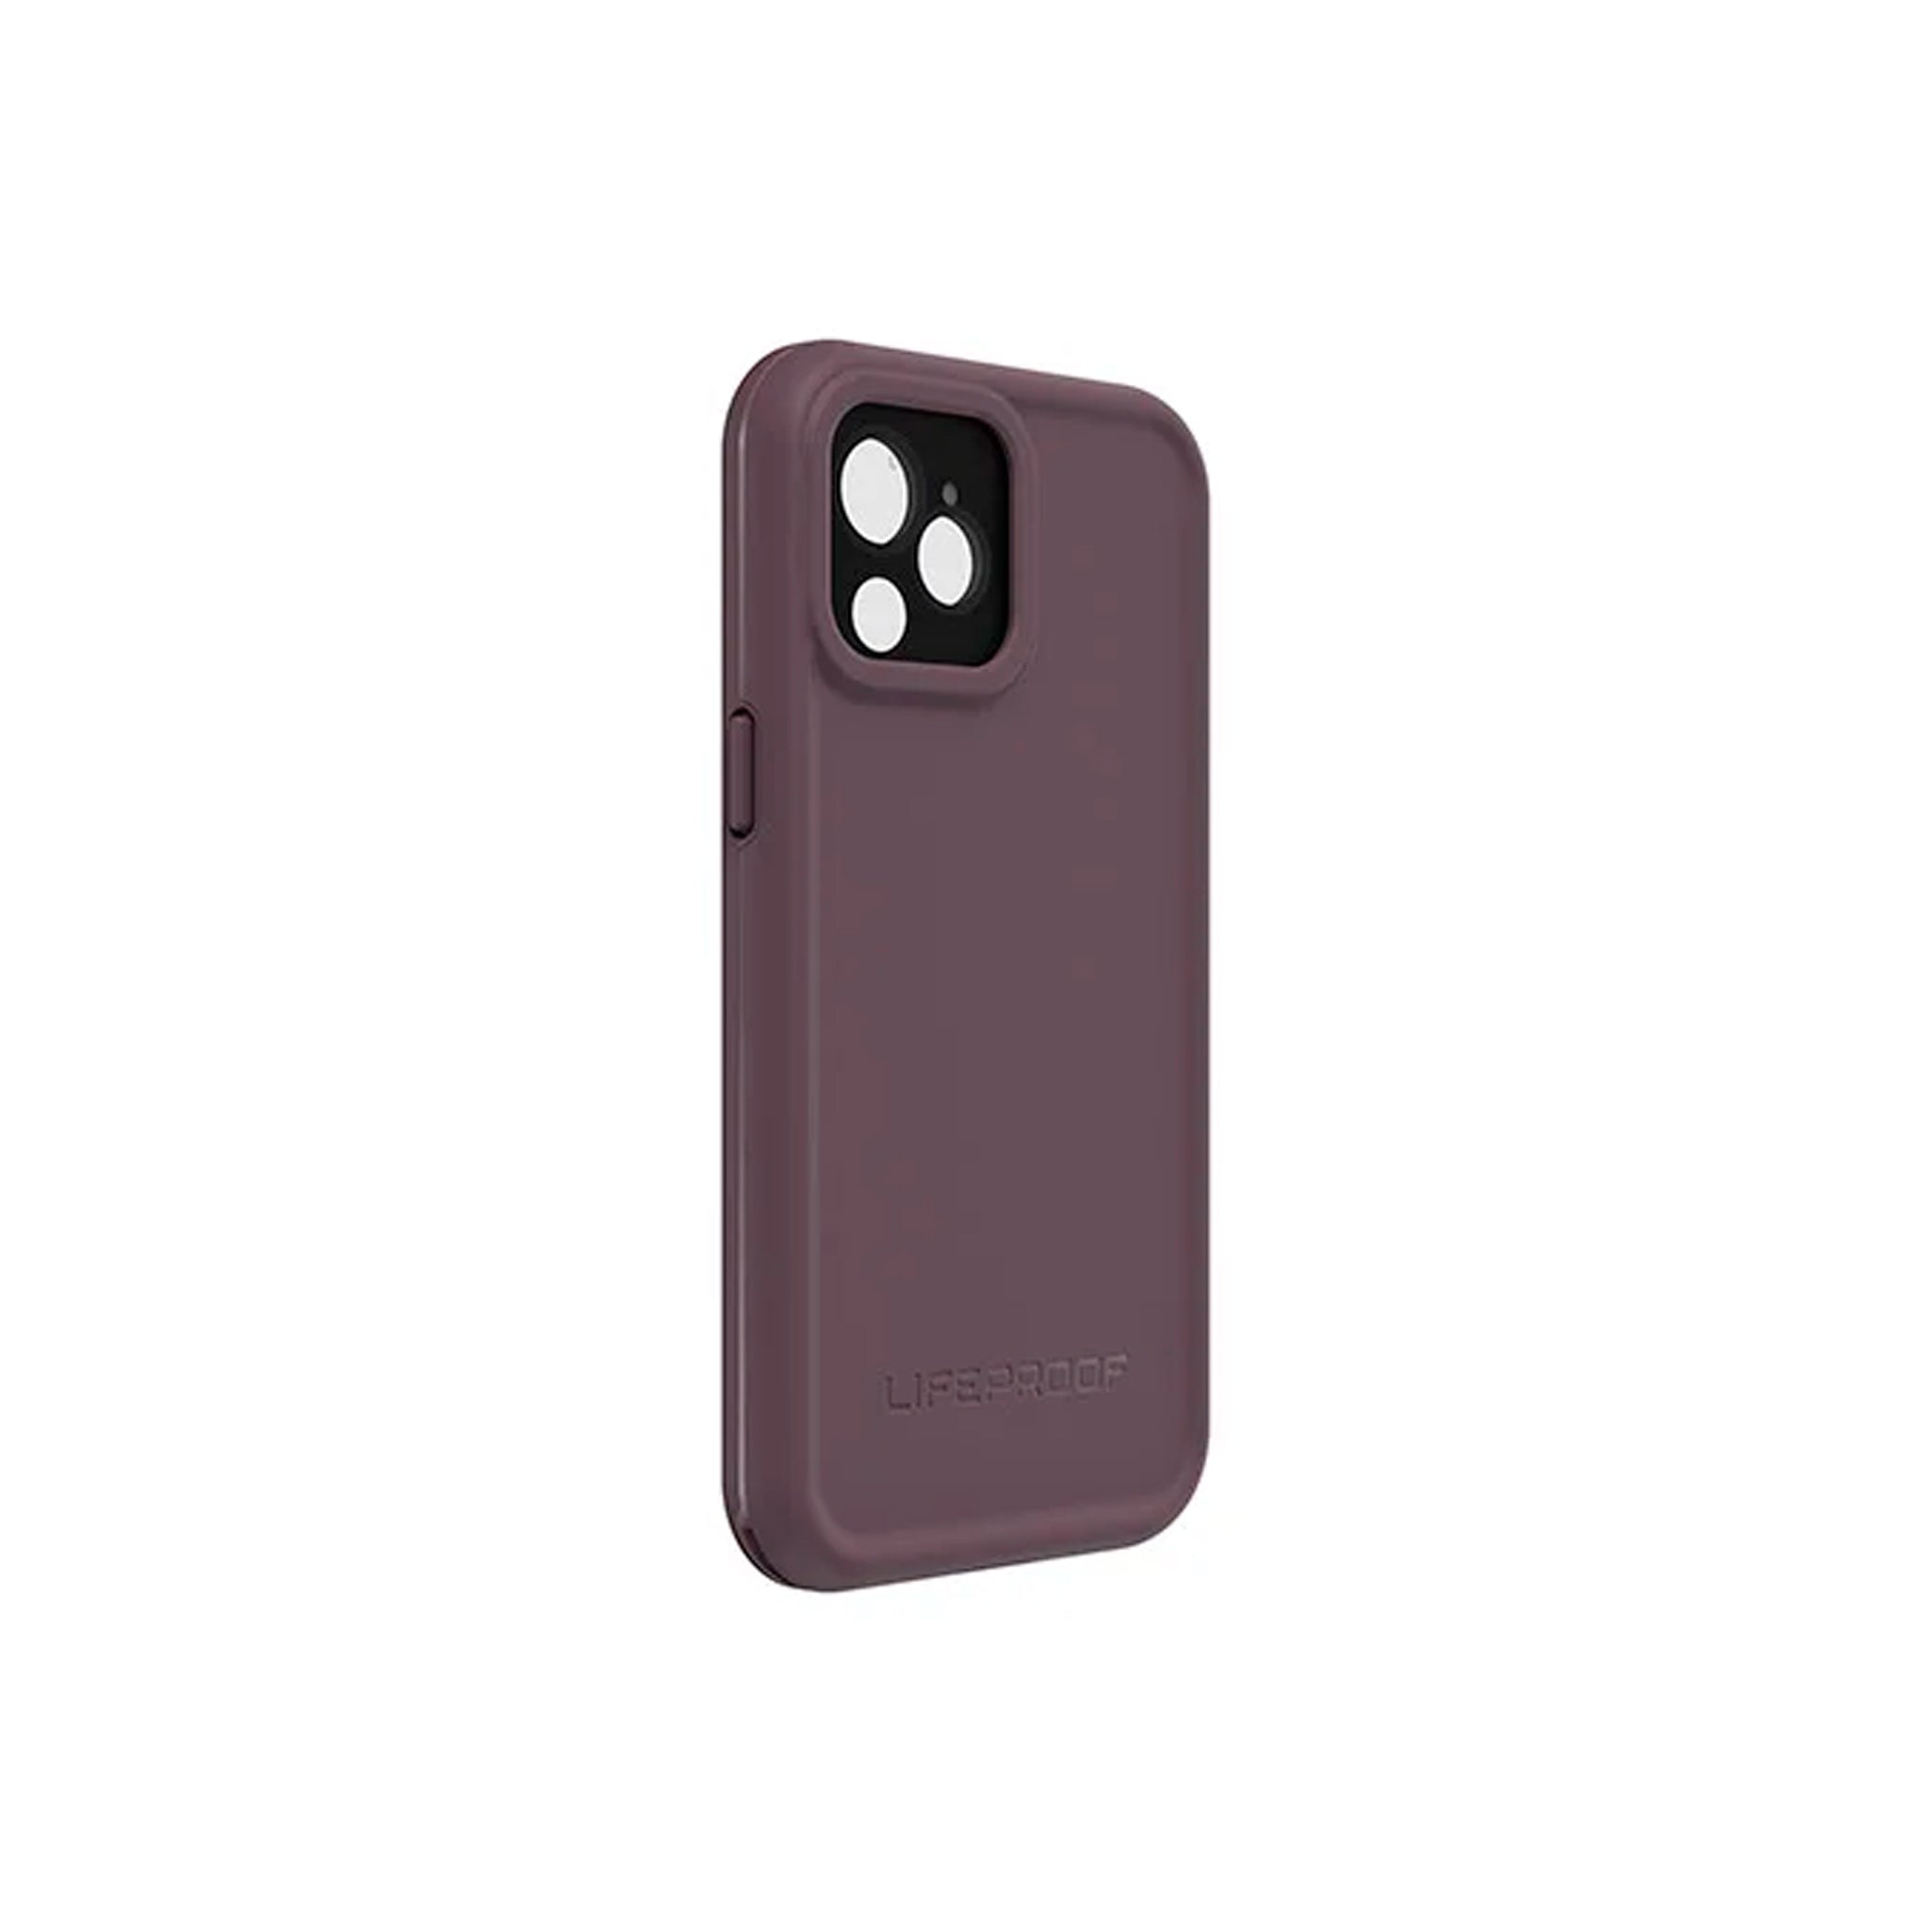 LifeProof - Fre for iPhone 12 mini - Ocean Violet